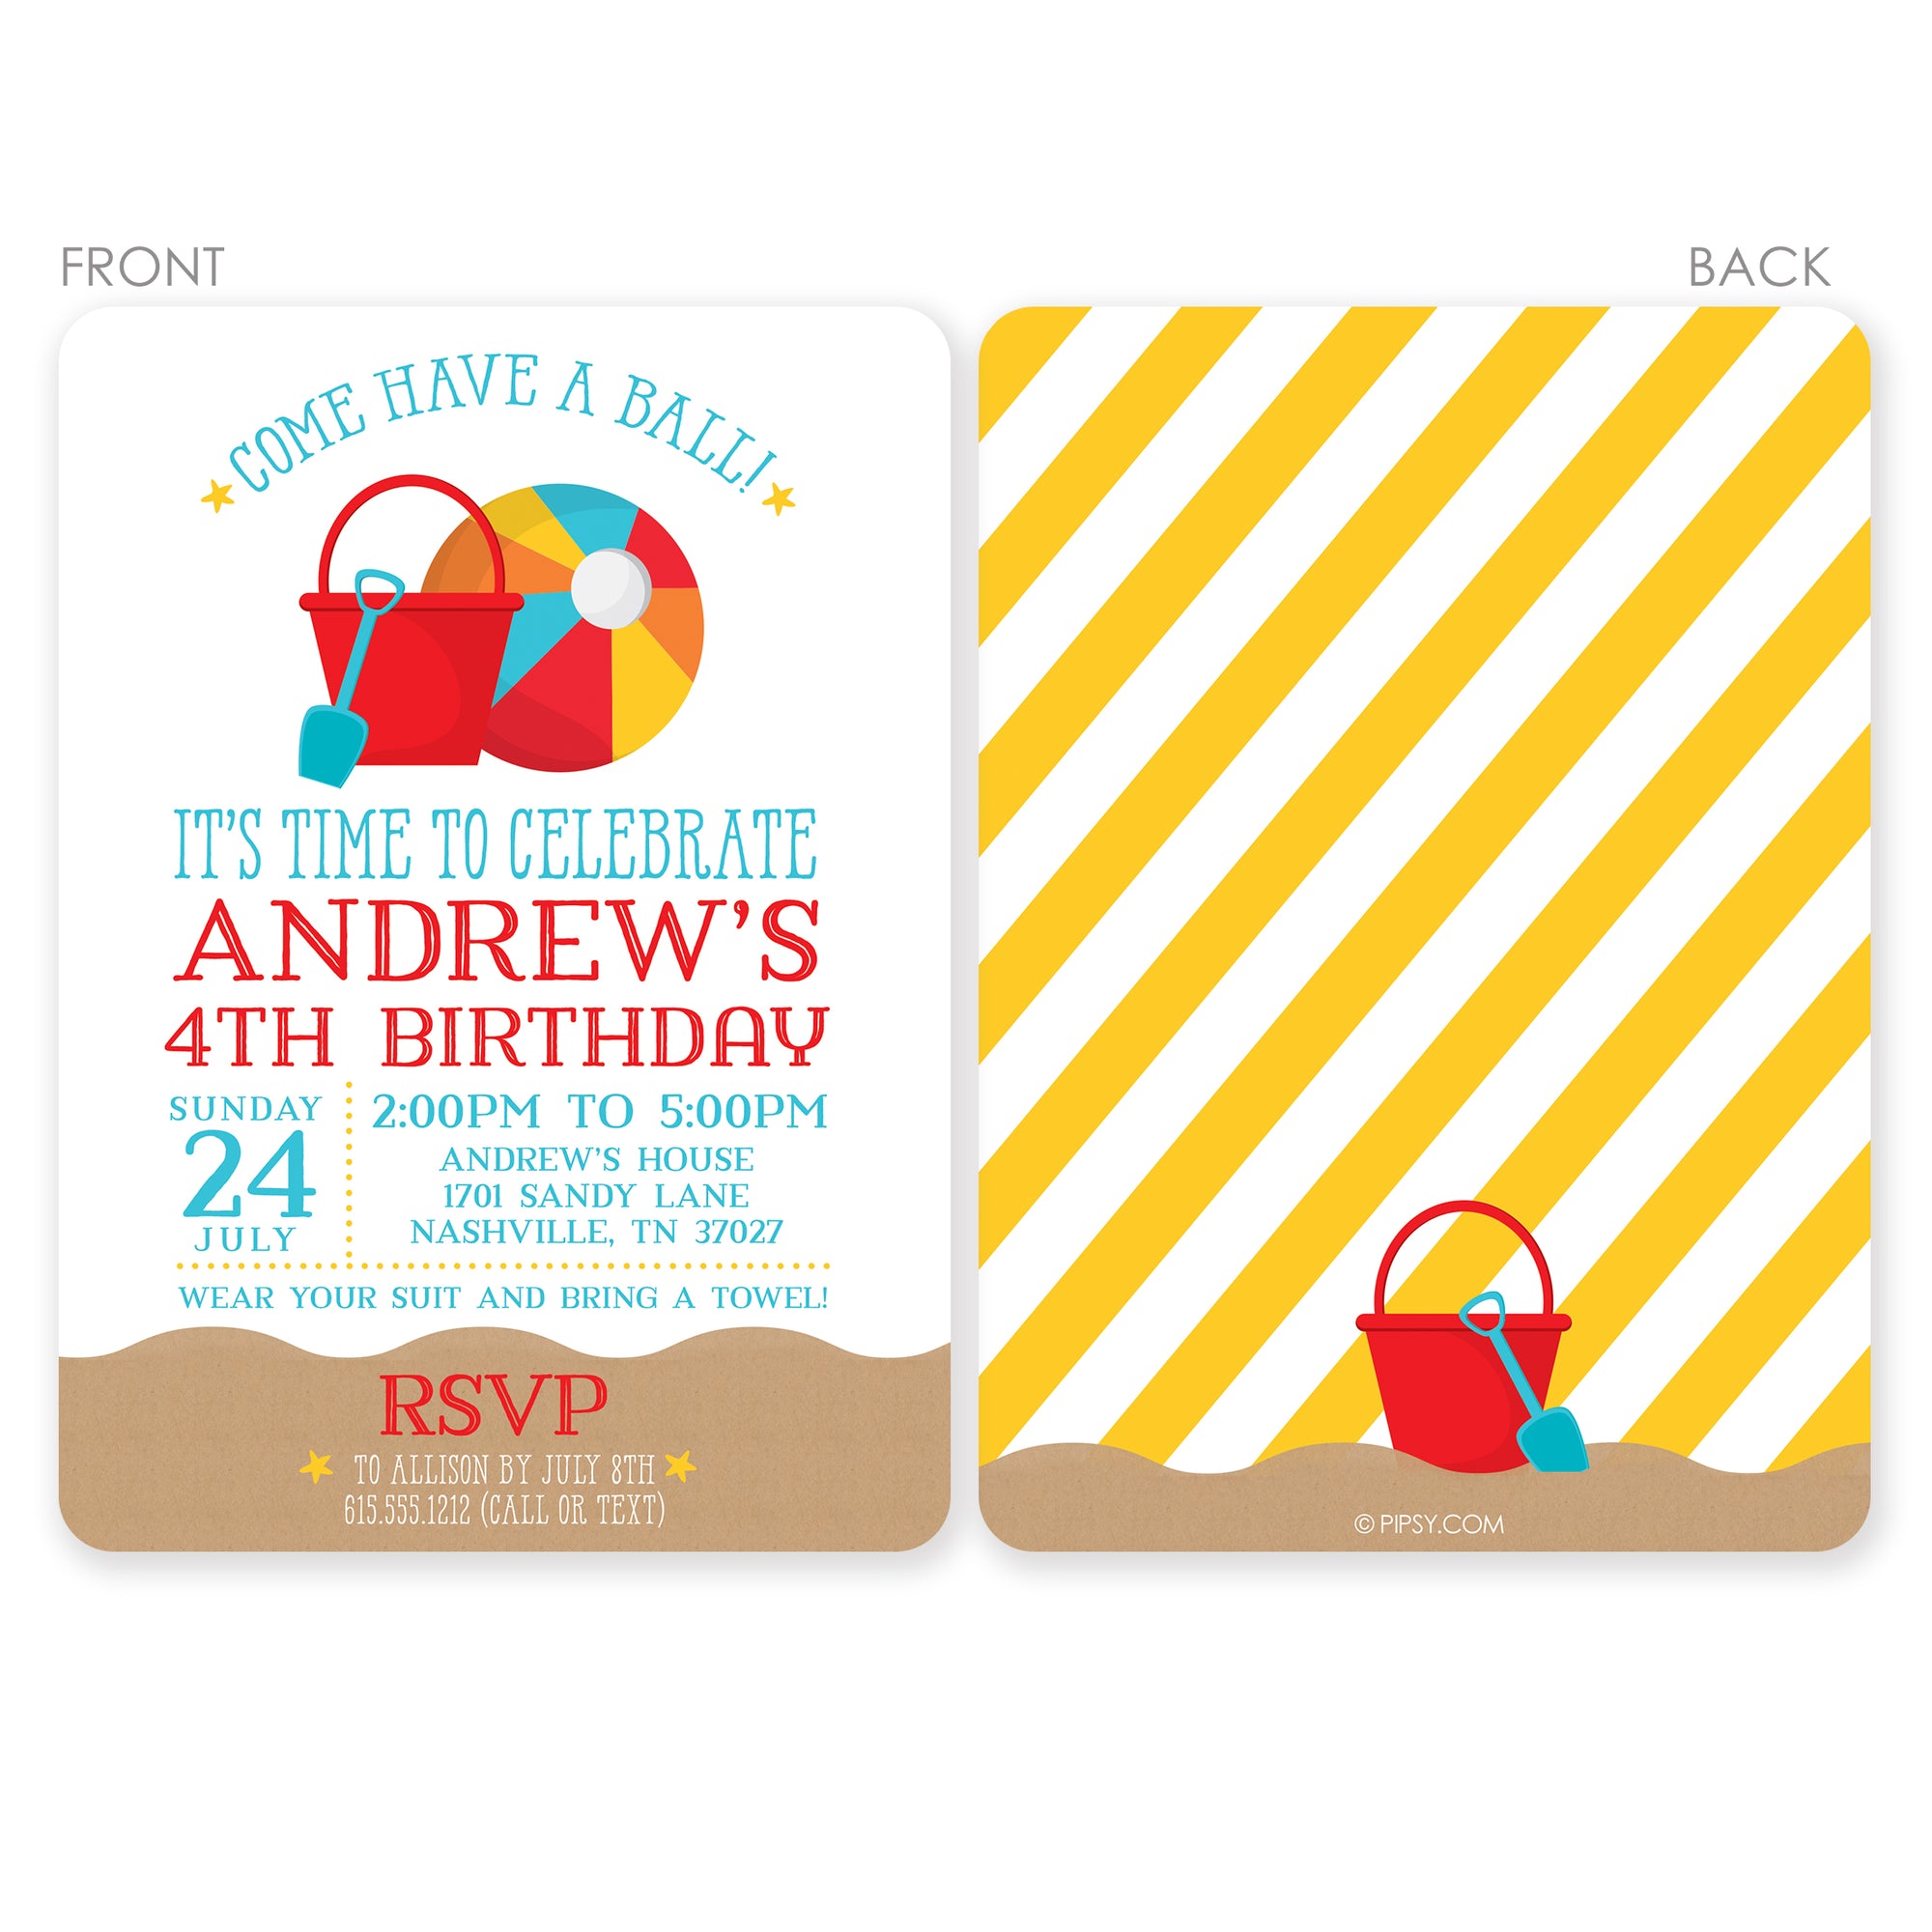 Beach Ball Printed Cardstock invitations, perfect for a beach, pool or splash party